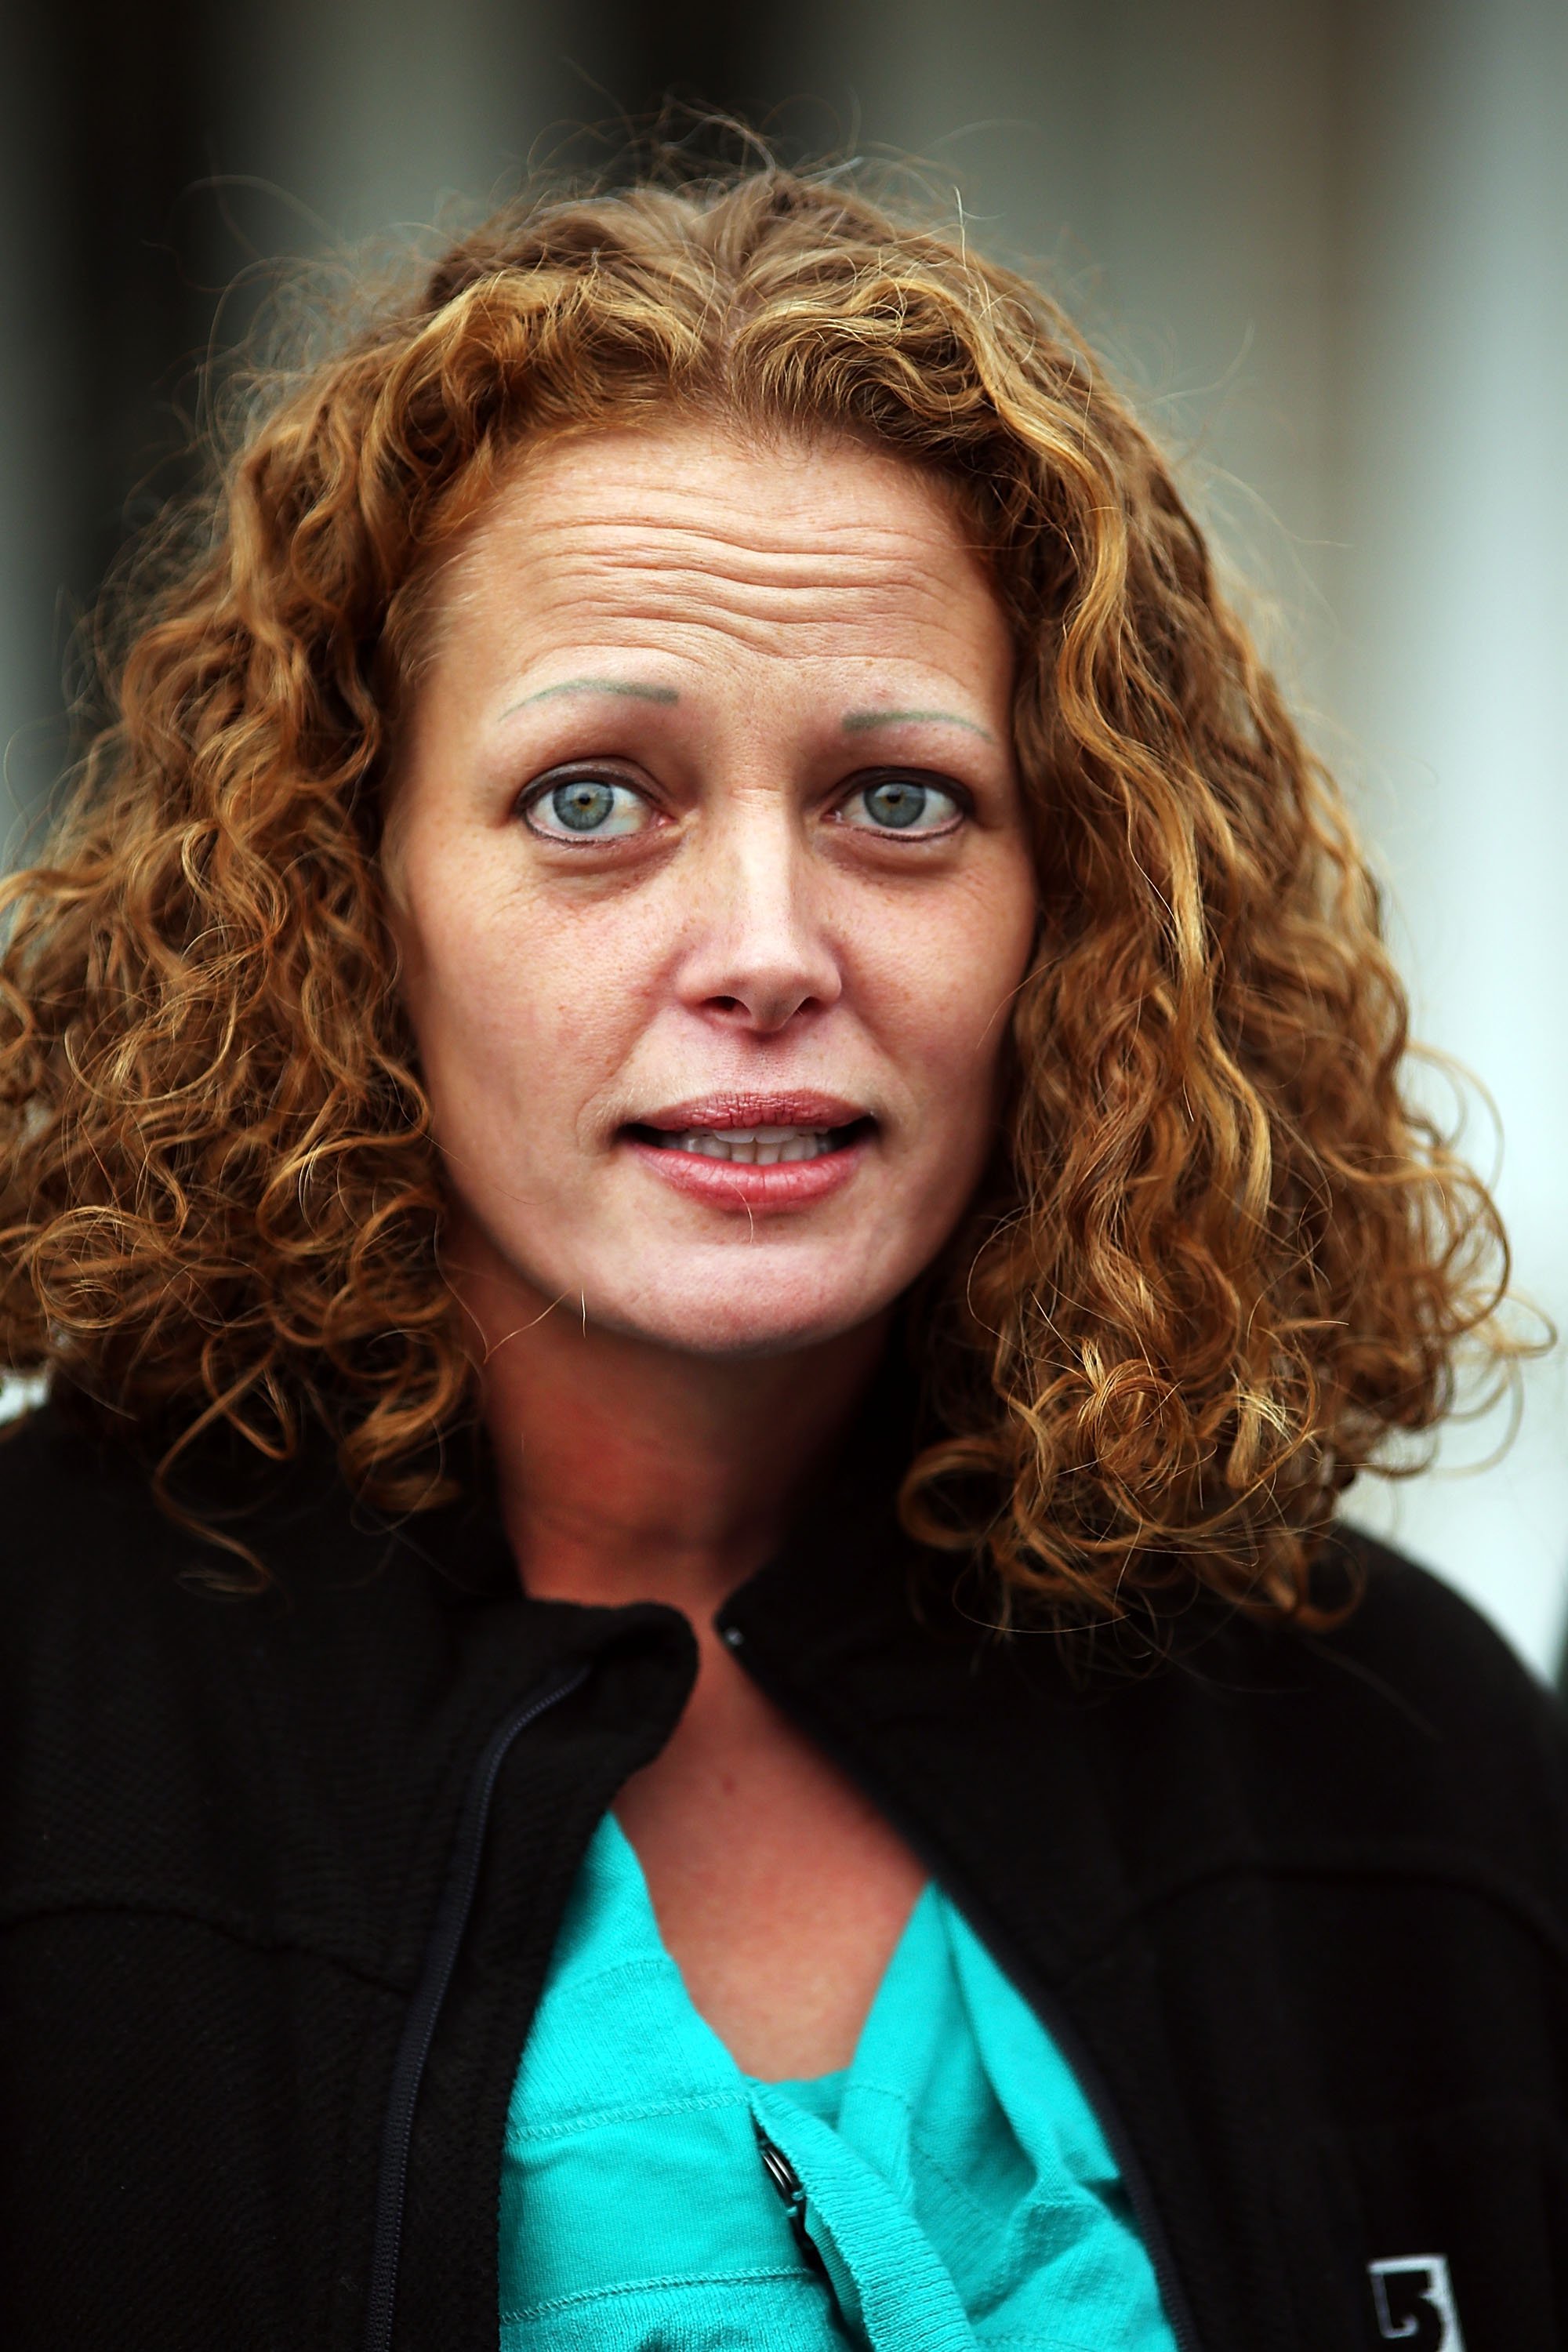 Kaci Hickox gives a statement to the media in front of her home on October 31, 2014 in Fort Kent, Maine. (Spencer Platt—Getty Images)